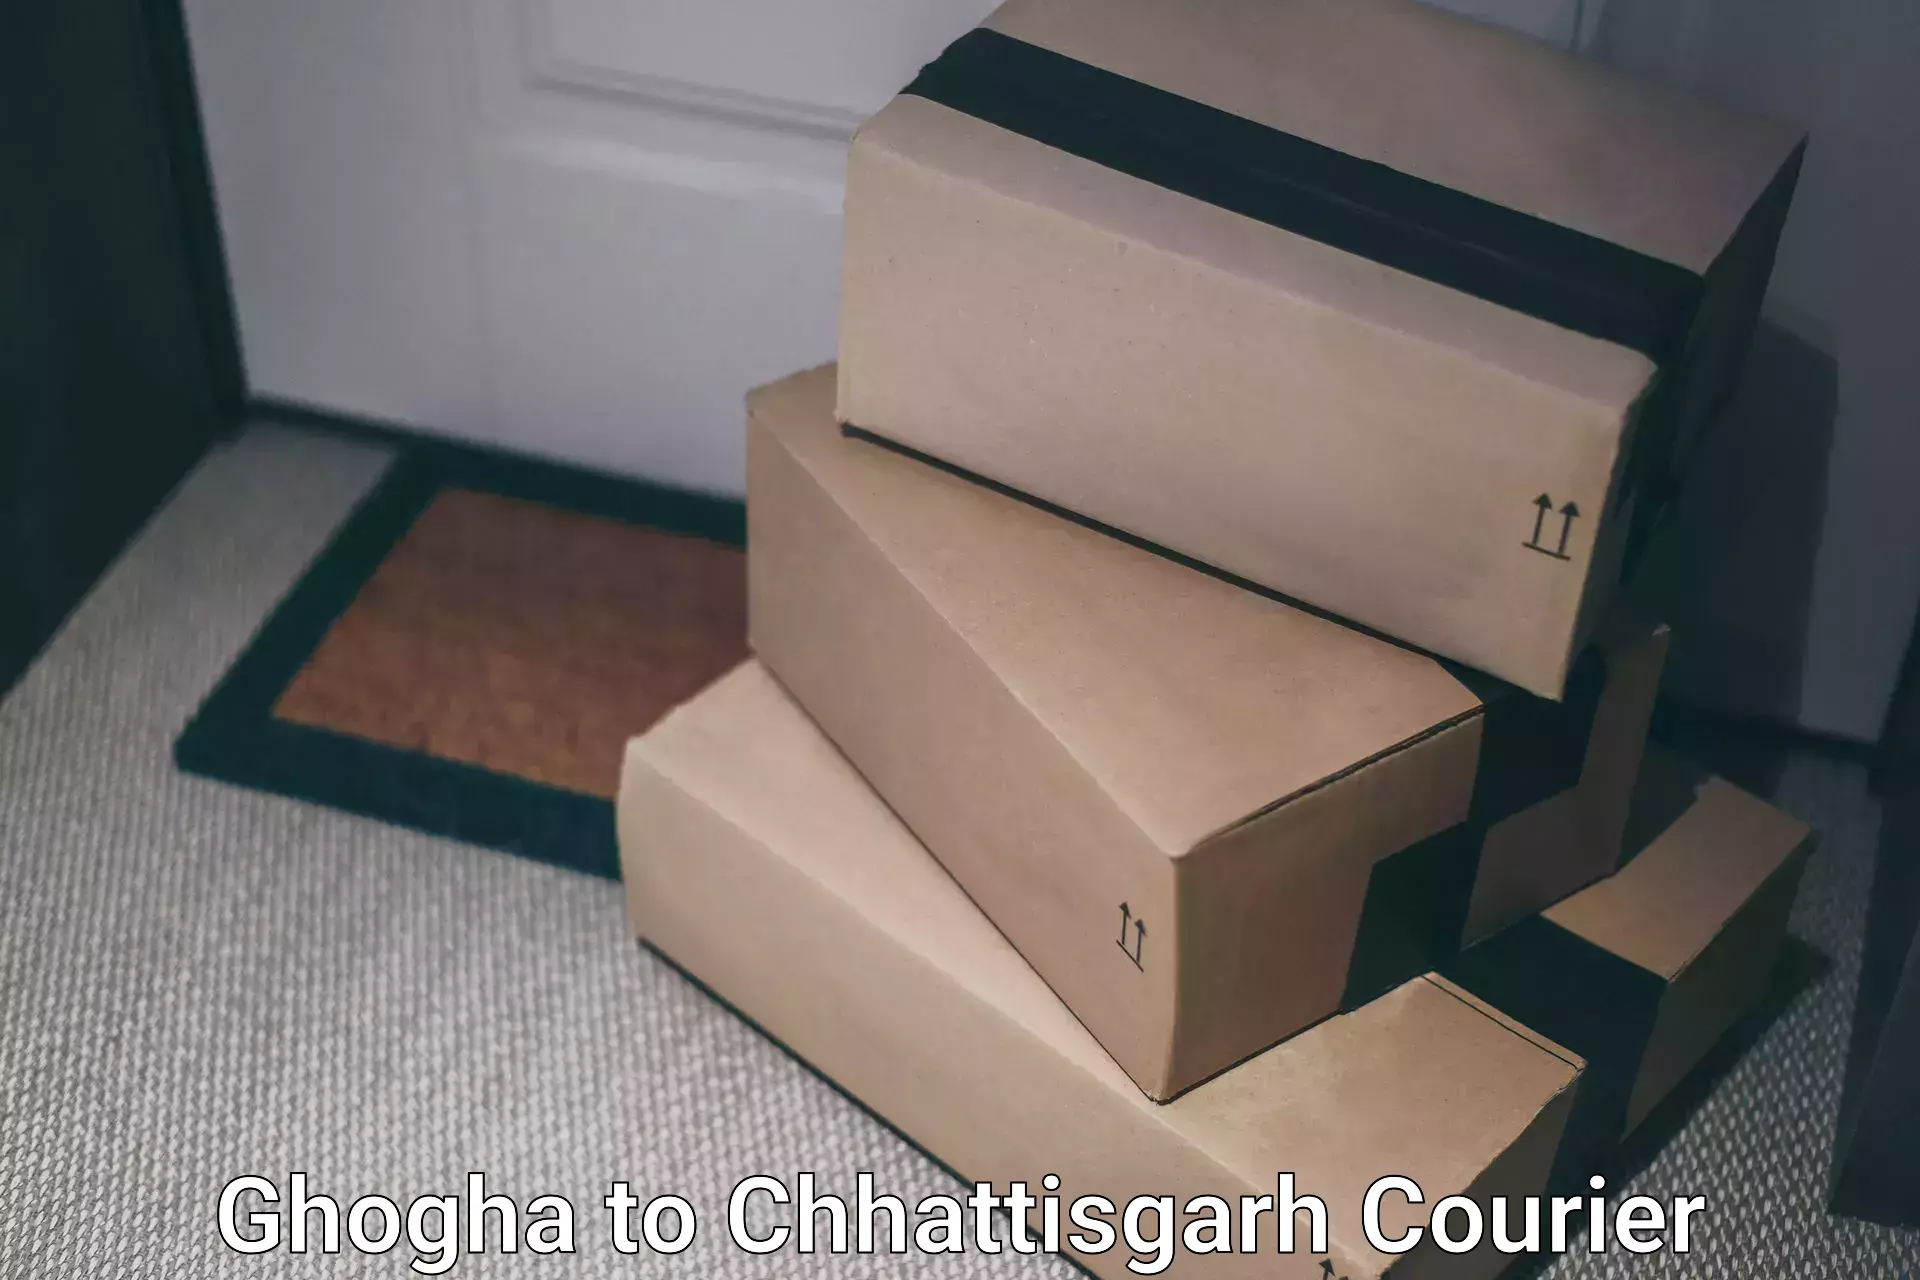 Multi-national courier services Ghogha to Bastar